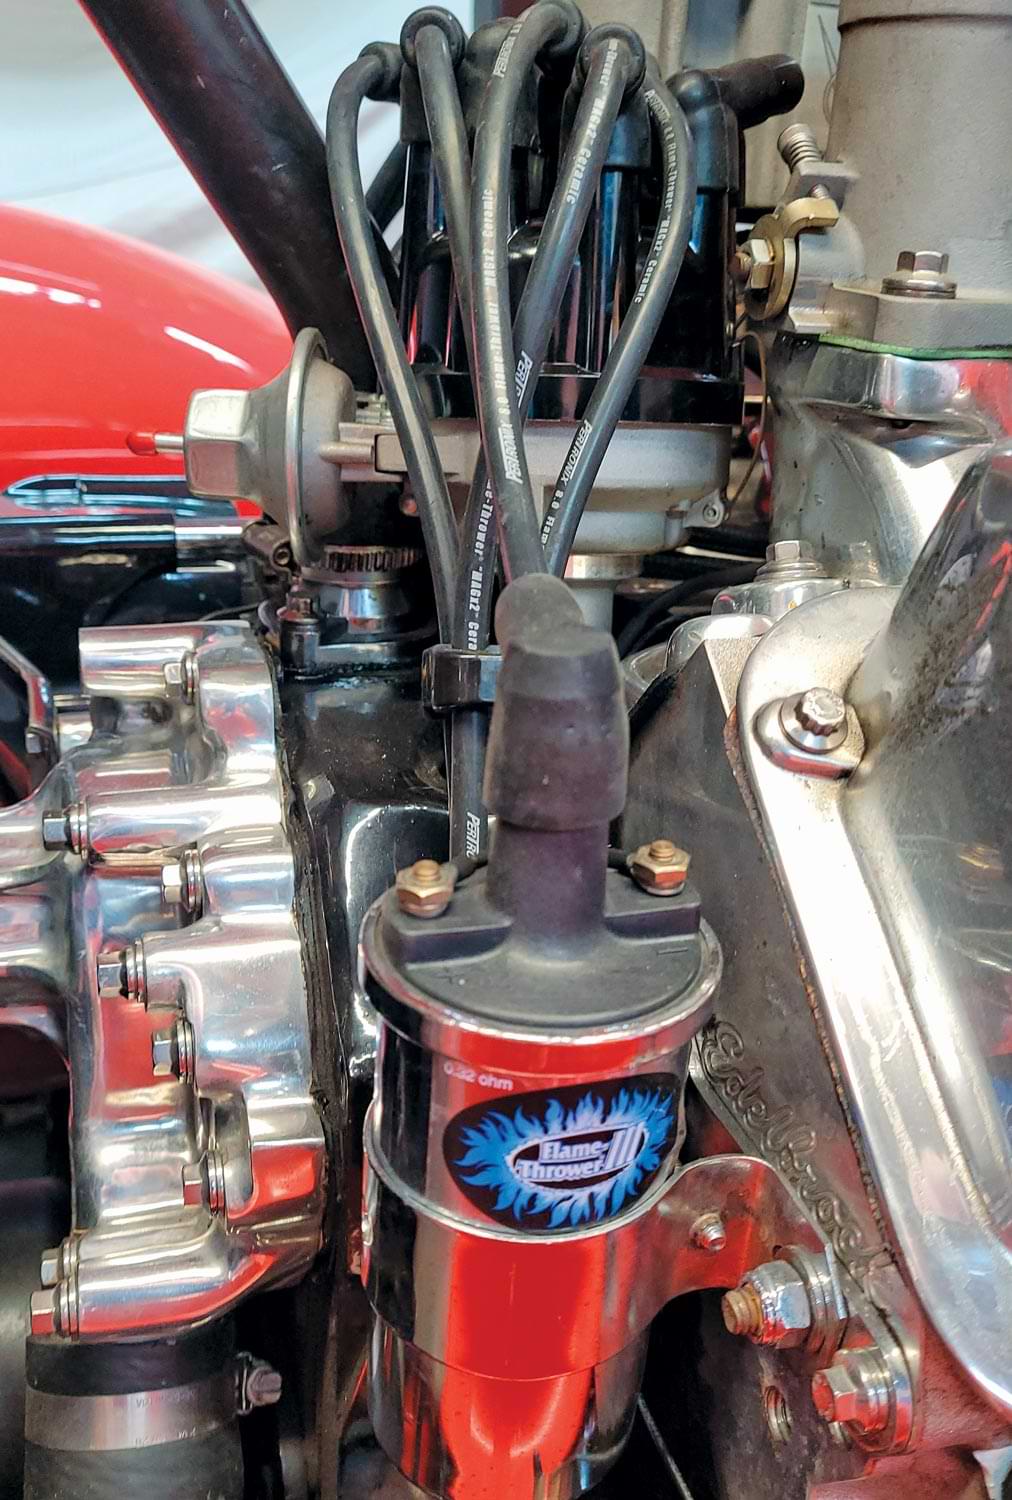 the existing ignition, consisting a PerTronix cast stock look distributor that we had built a one-off ignition trigger system to work with the Holley HP ECU